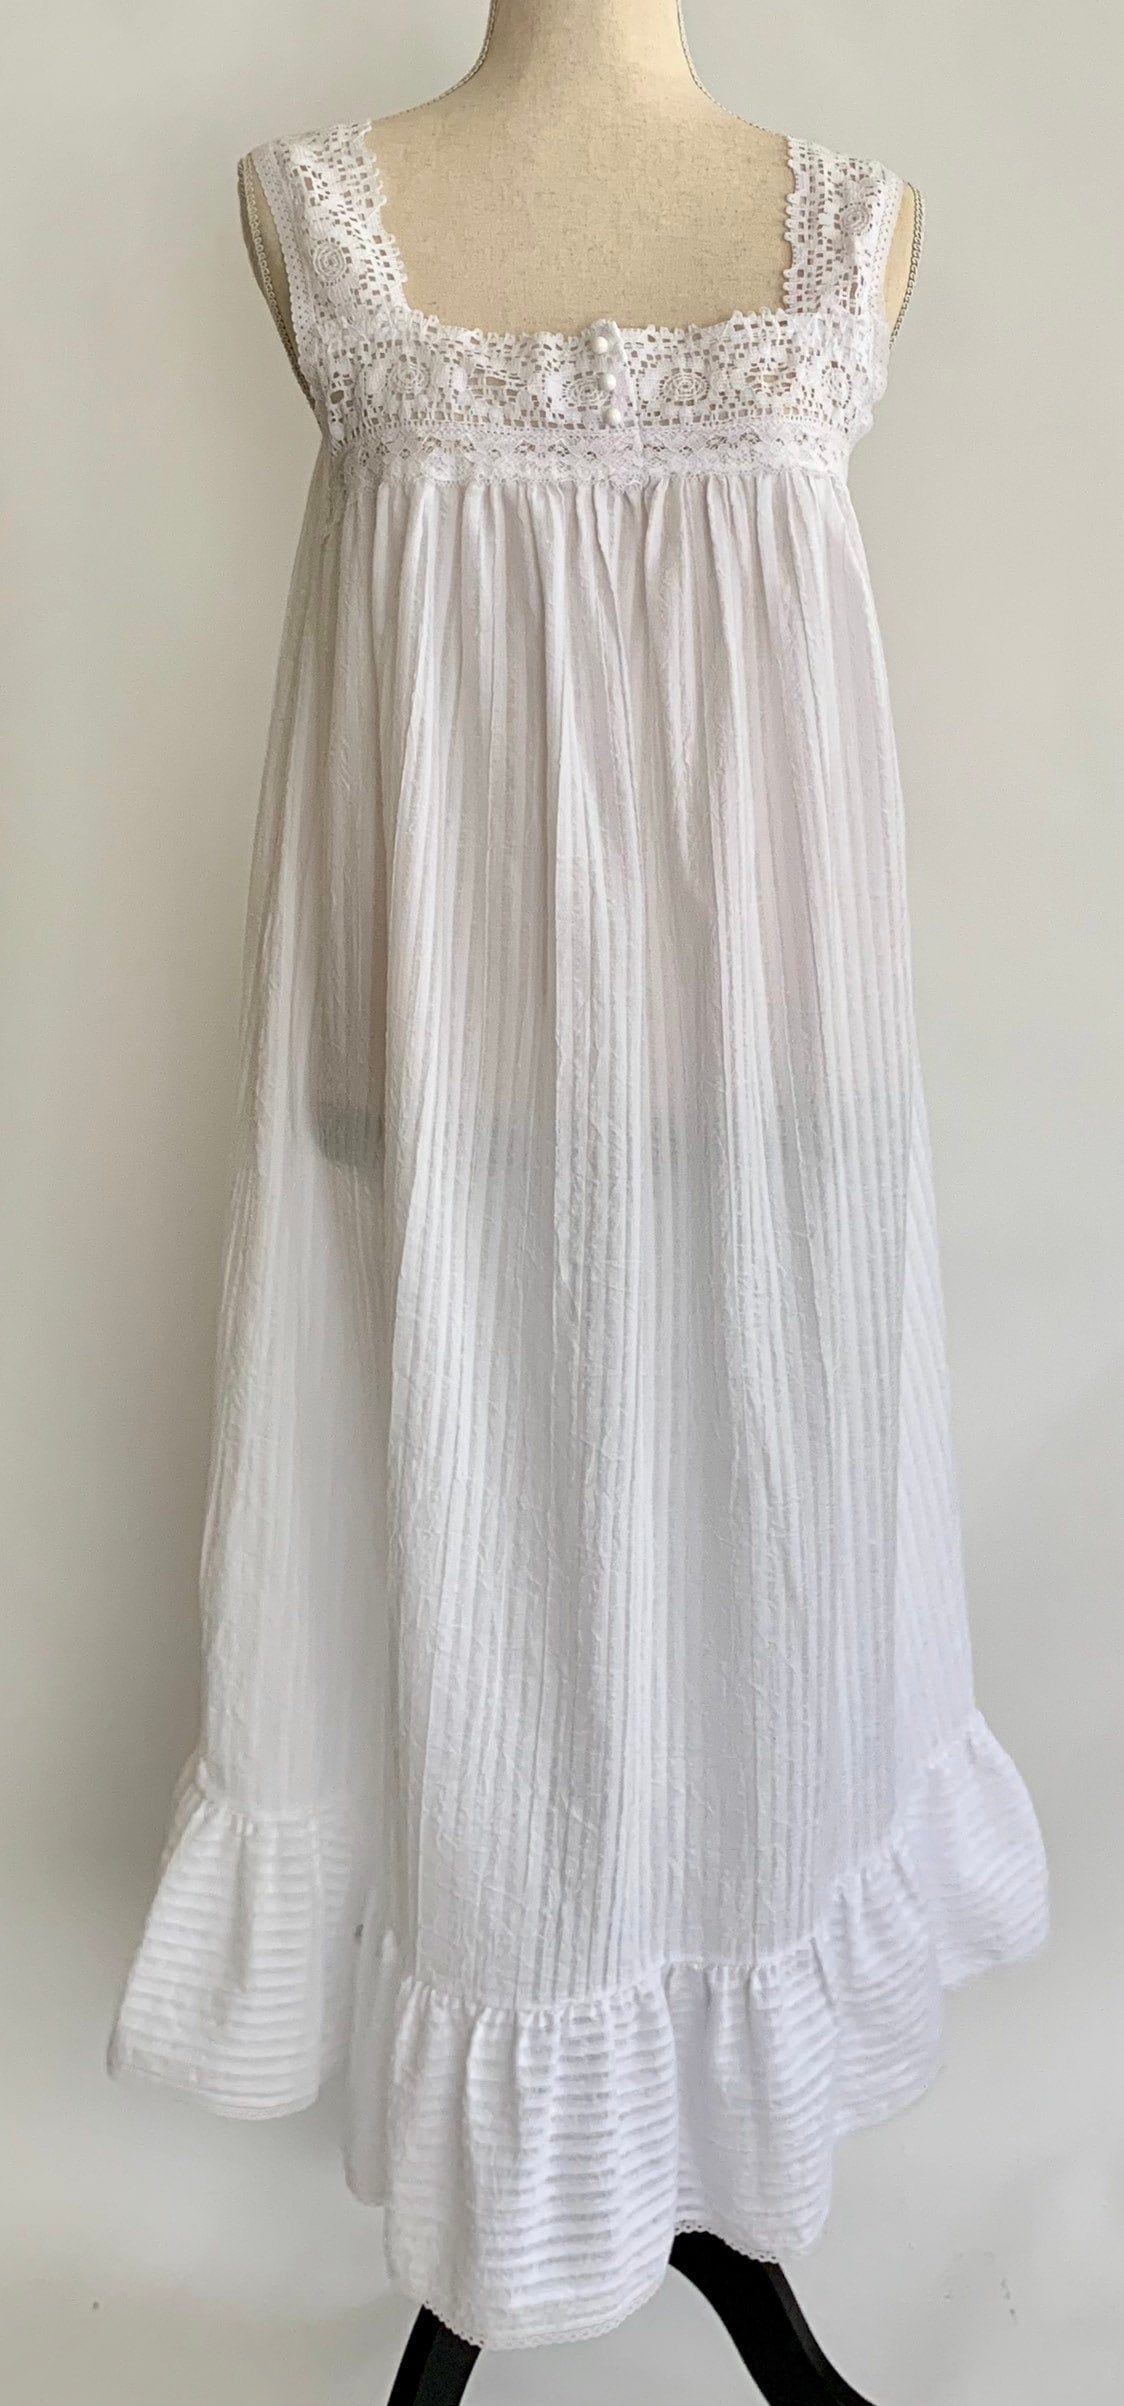 Long White Cotton Nightgown Vintage Willow Creek Made in USA Lace Trim ...